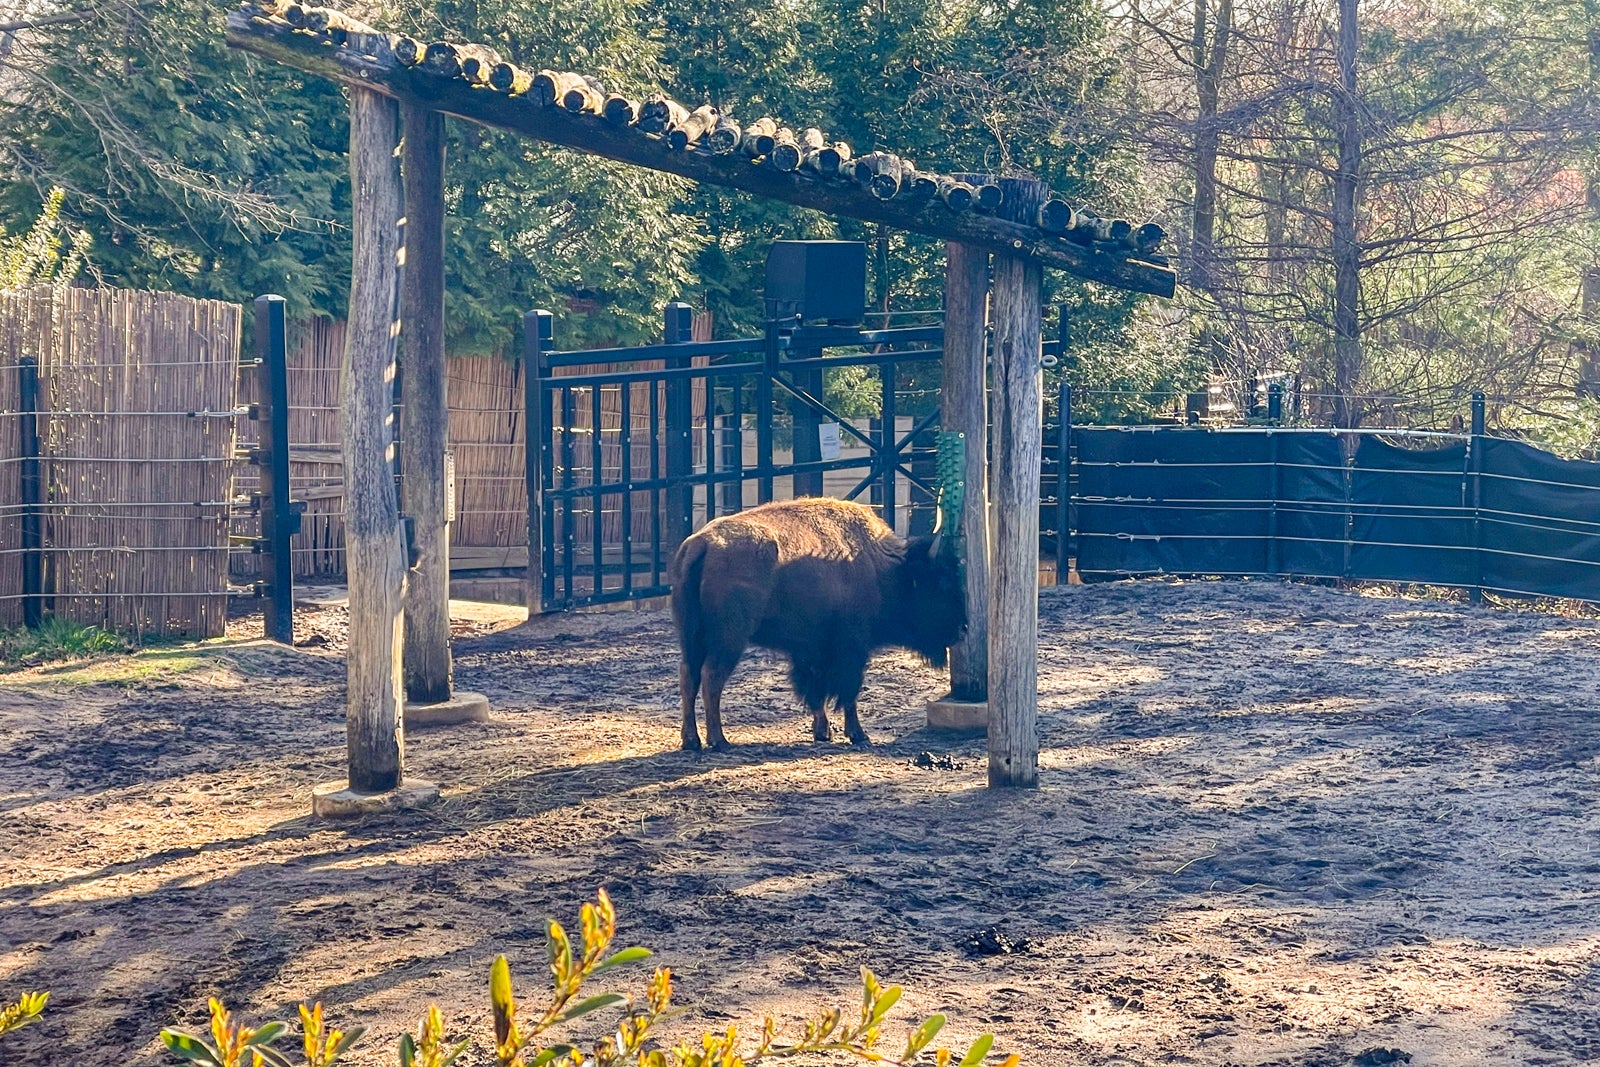 Bison at the National Zoo